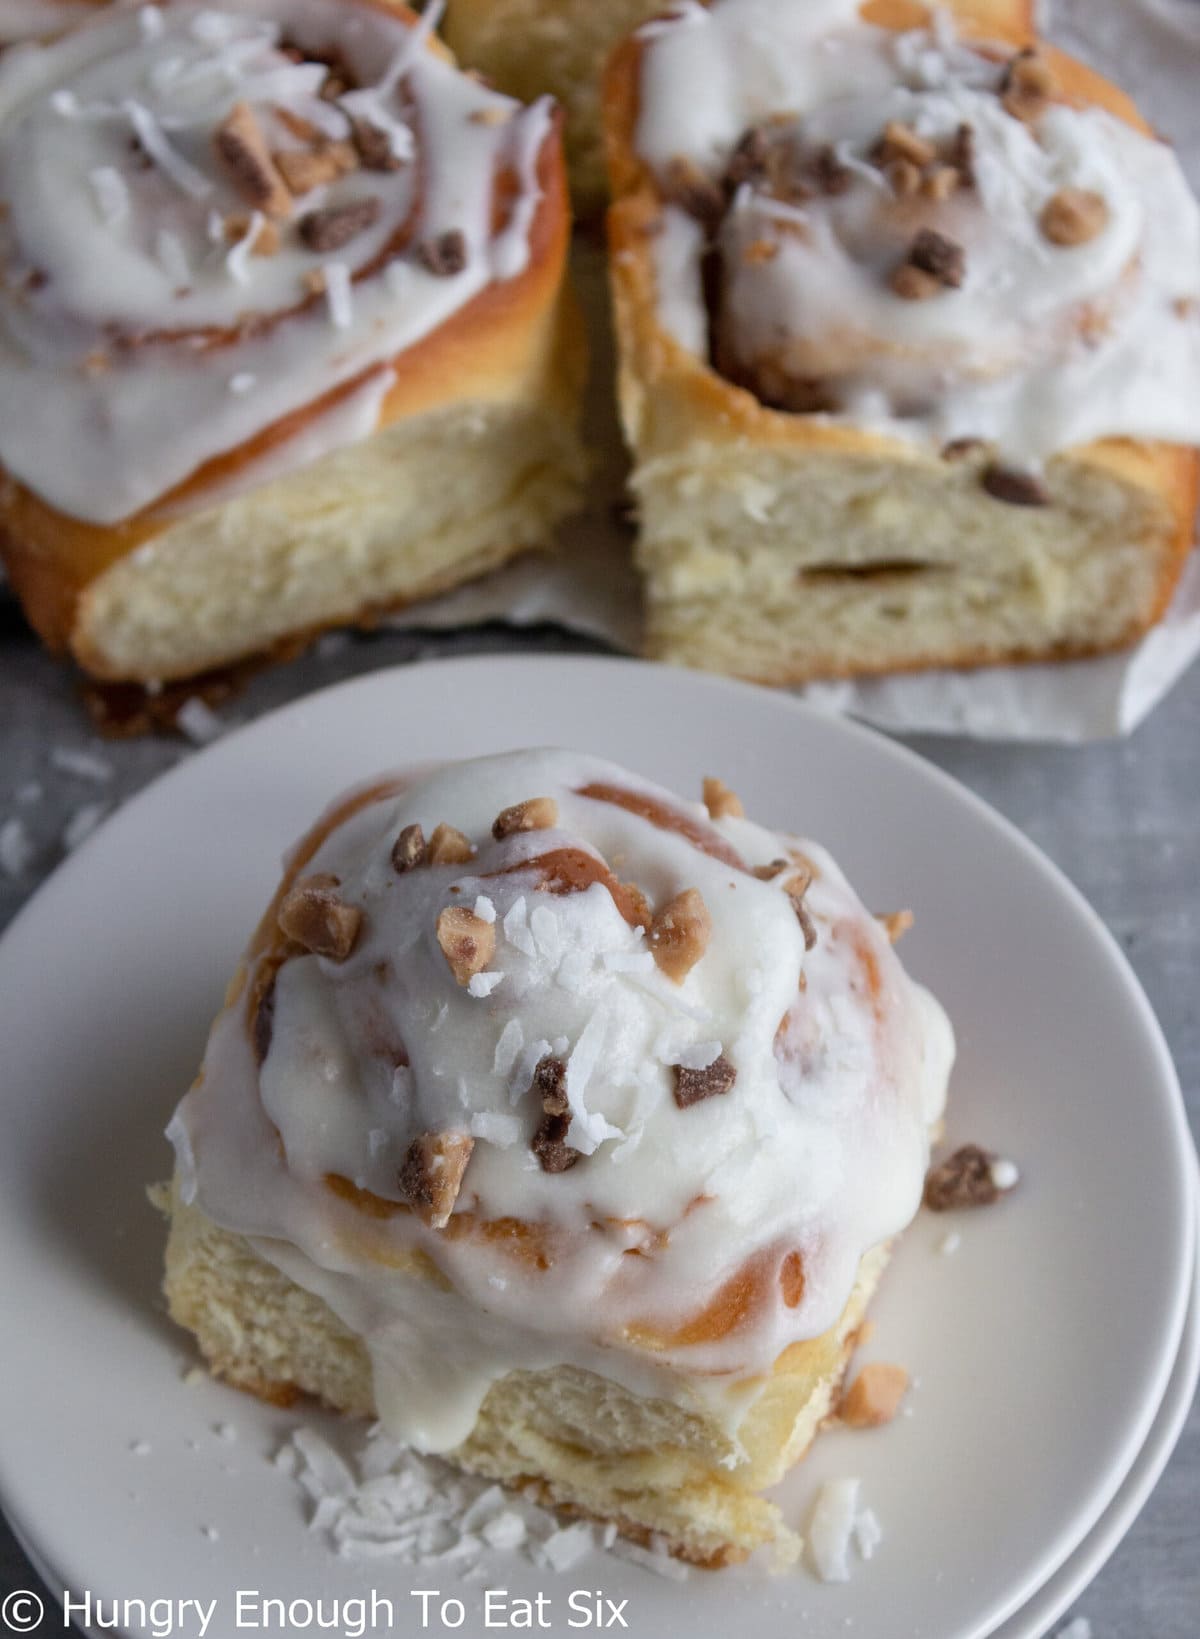 Swirled sweet buns with white icing.